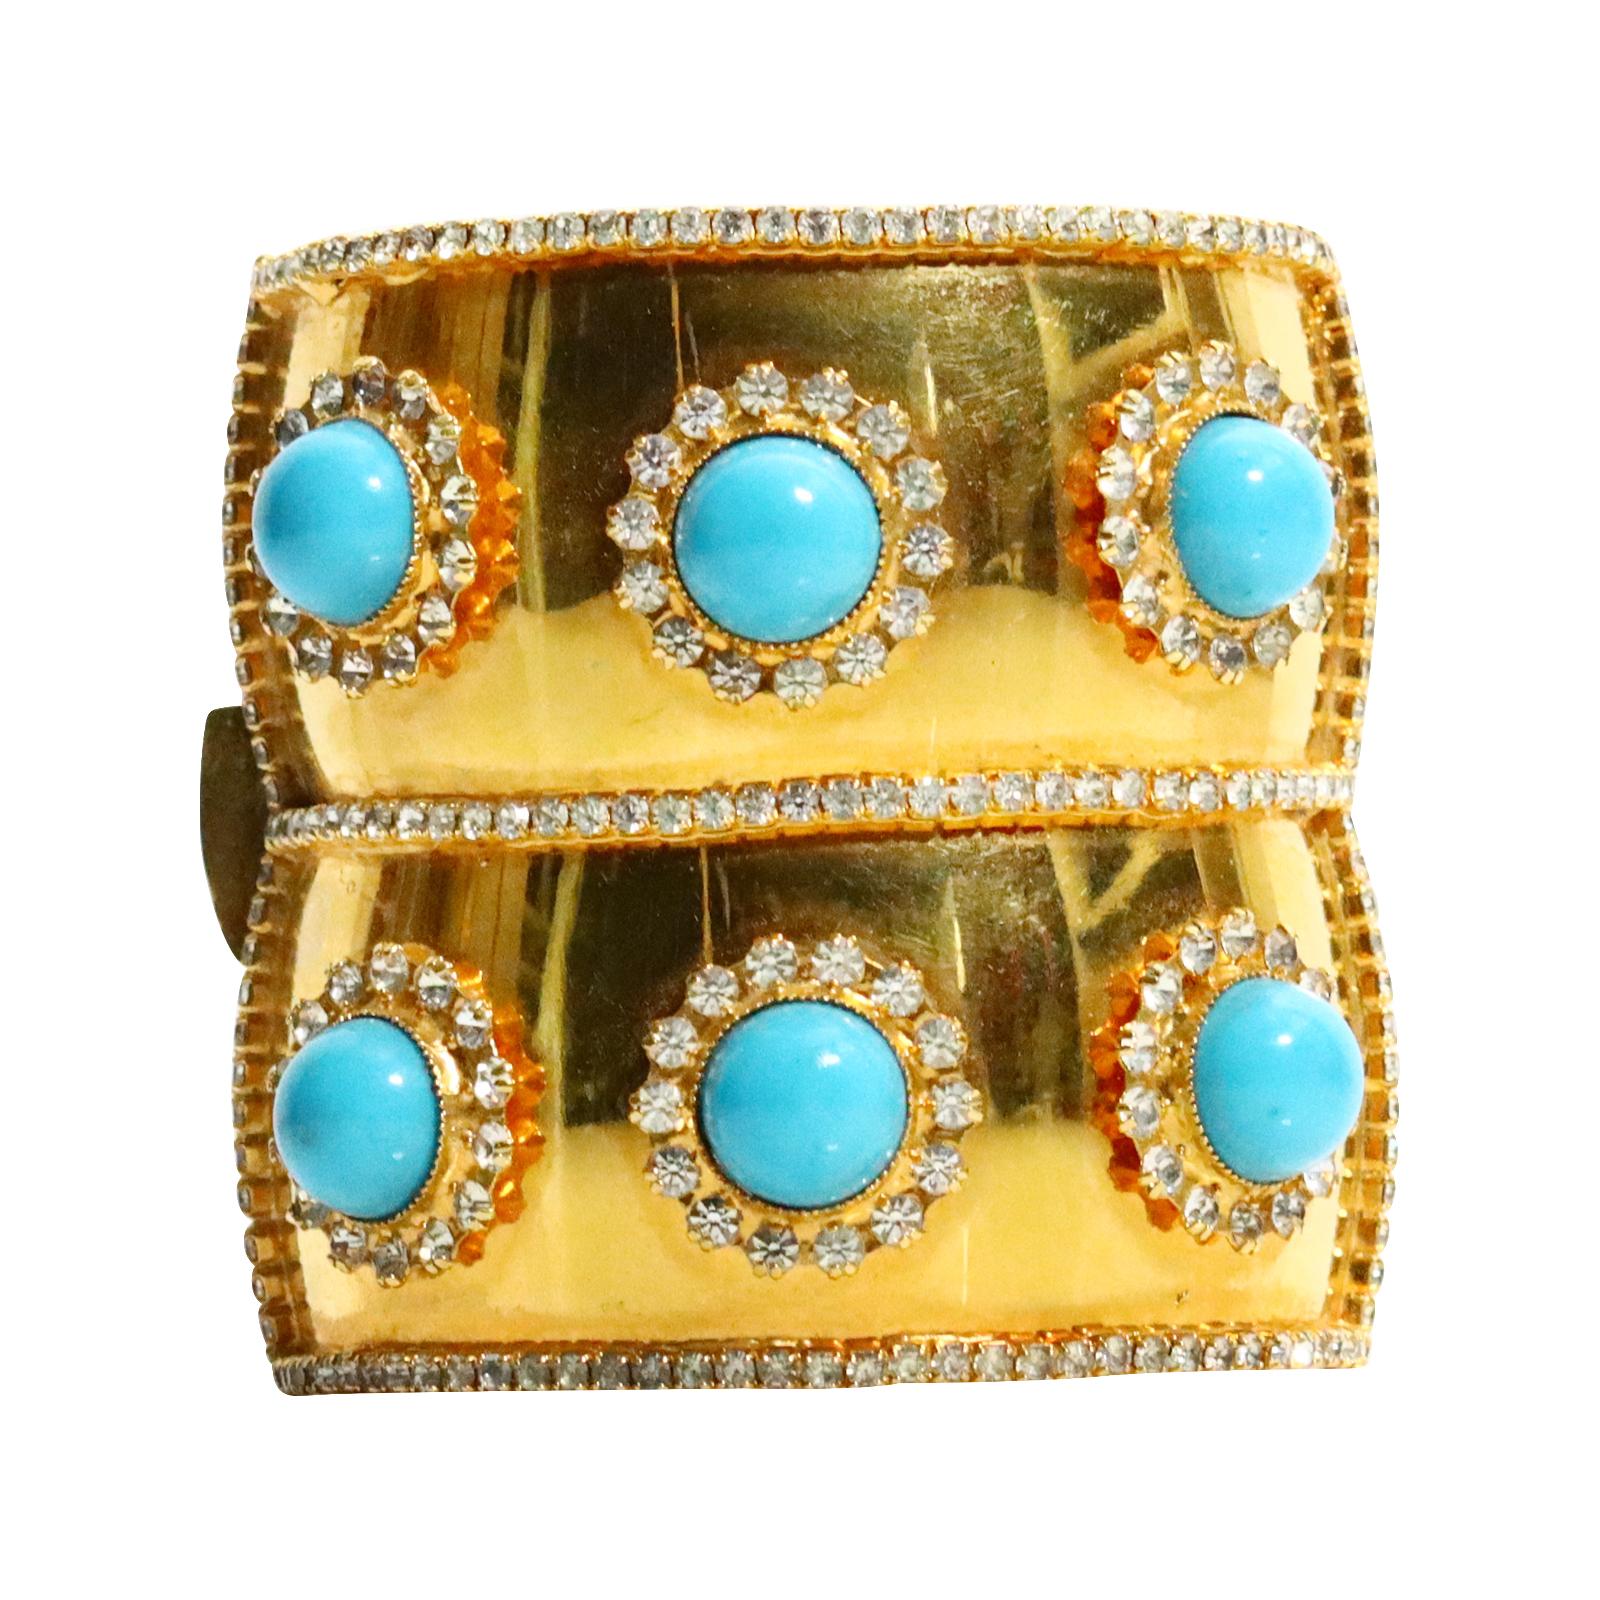 Vintage deLillo Gold Tone Crystal with Faux Turquoise Bracelet Circa !970s For Sale 6